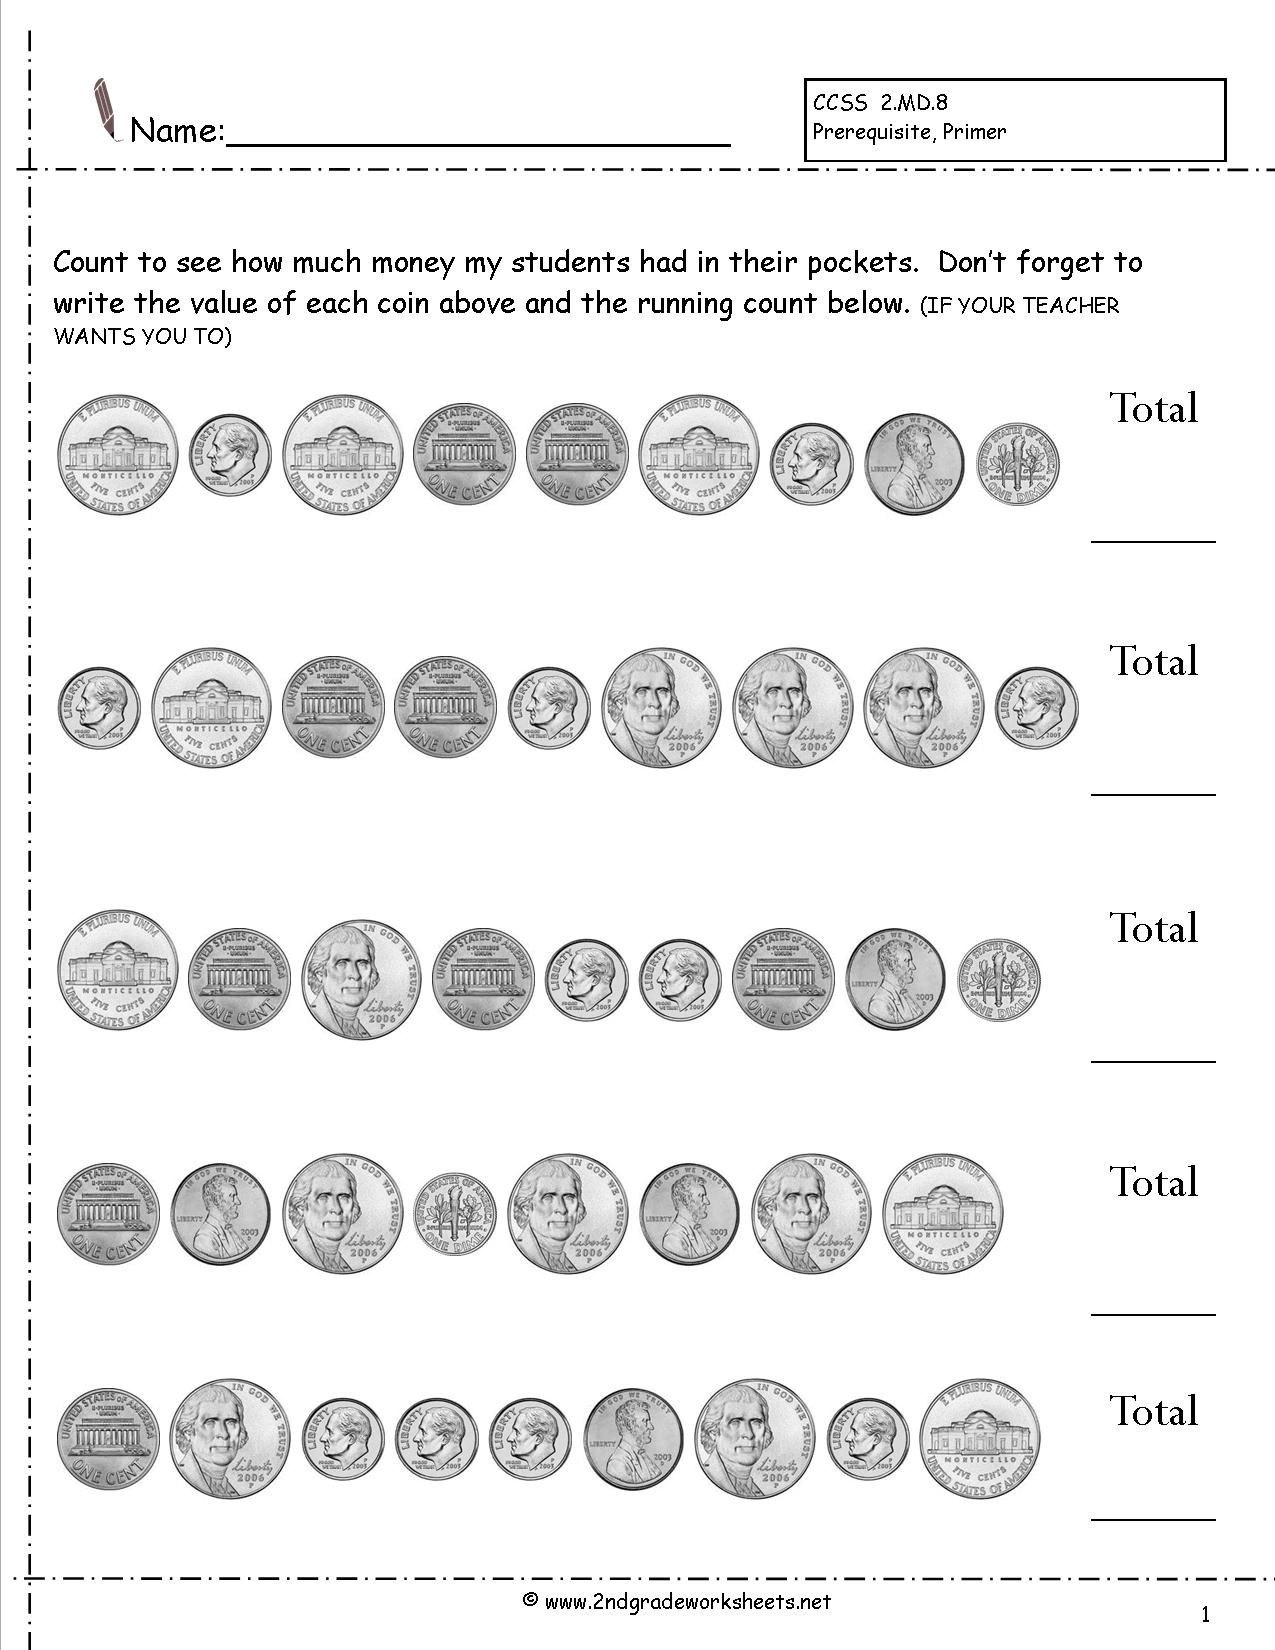 Counting Coins And Money Worksheets And Printouts - Free Printable Counting Money Worksheets For 2Nd Grade